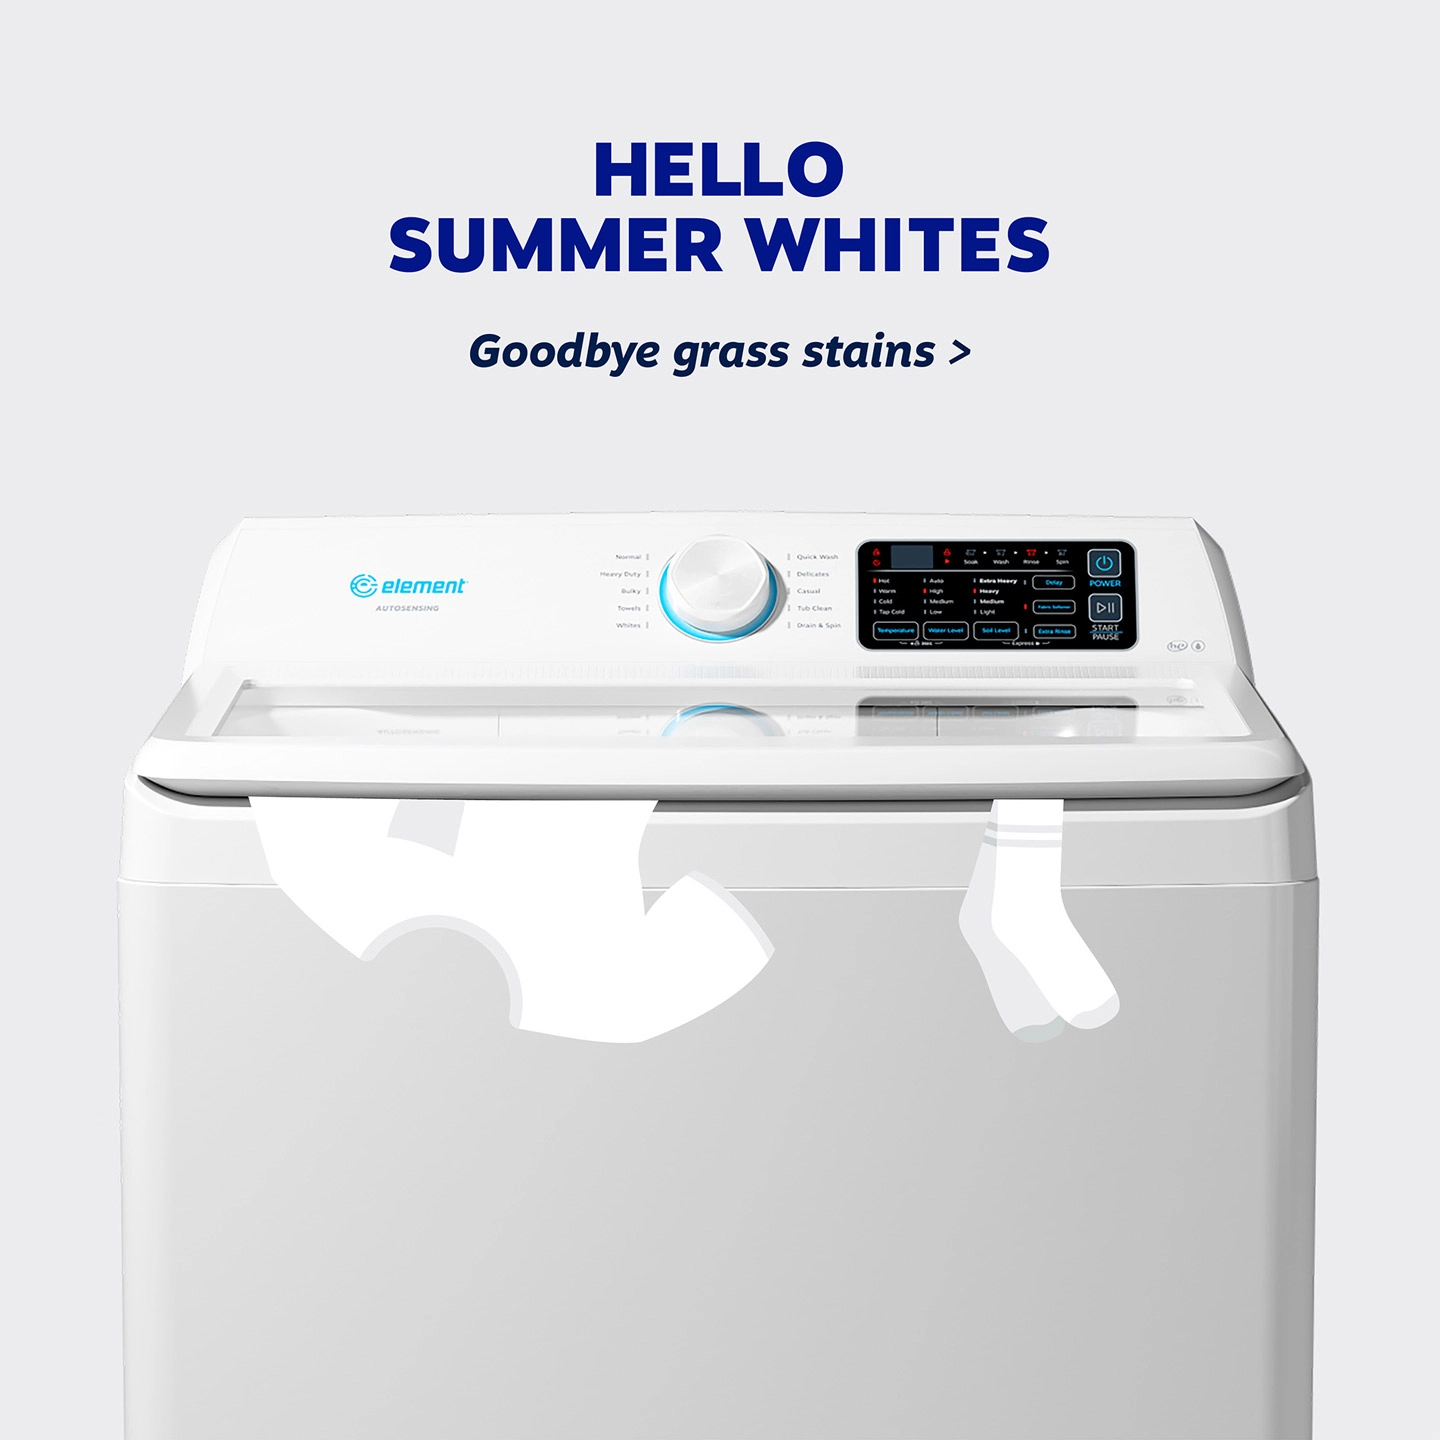 Hello summer whites - shop Element washers and dryers